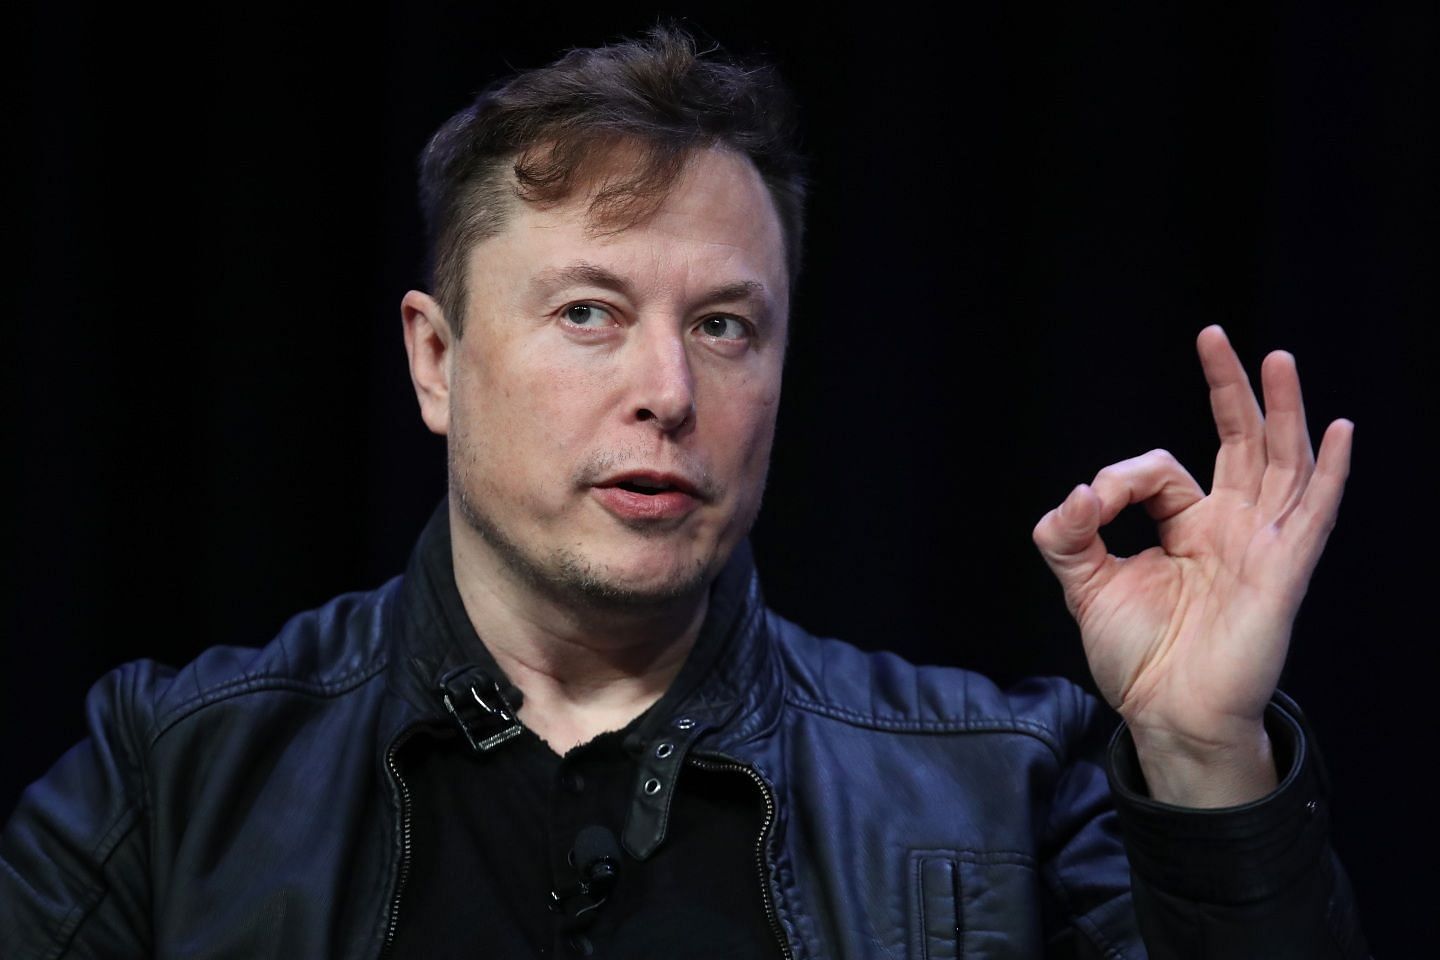 Elon Musk acquired Twitter on October 27, 2022 (image via Getty/Will McNamee)